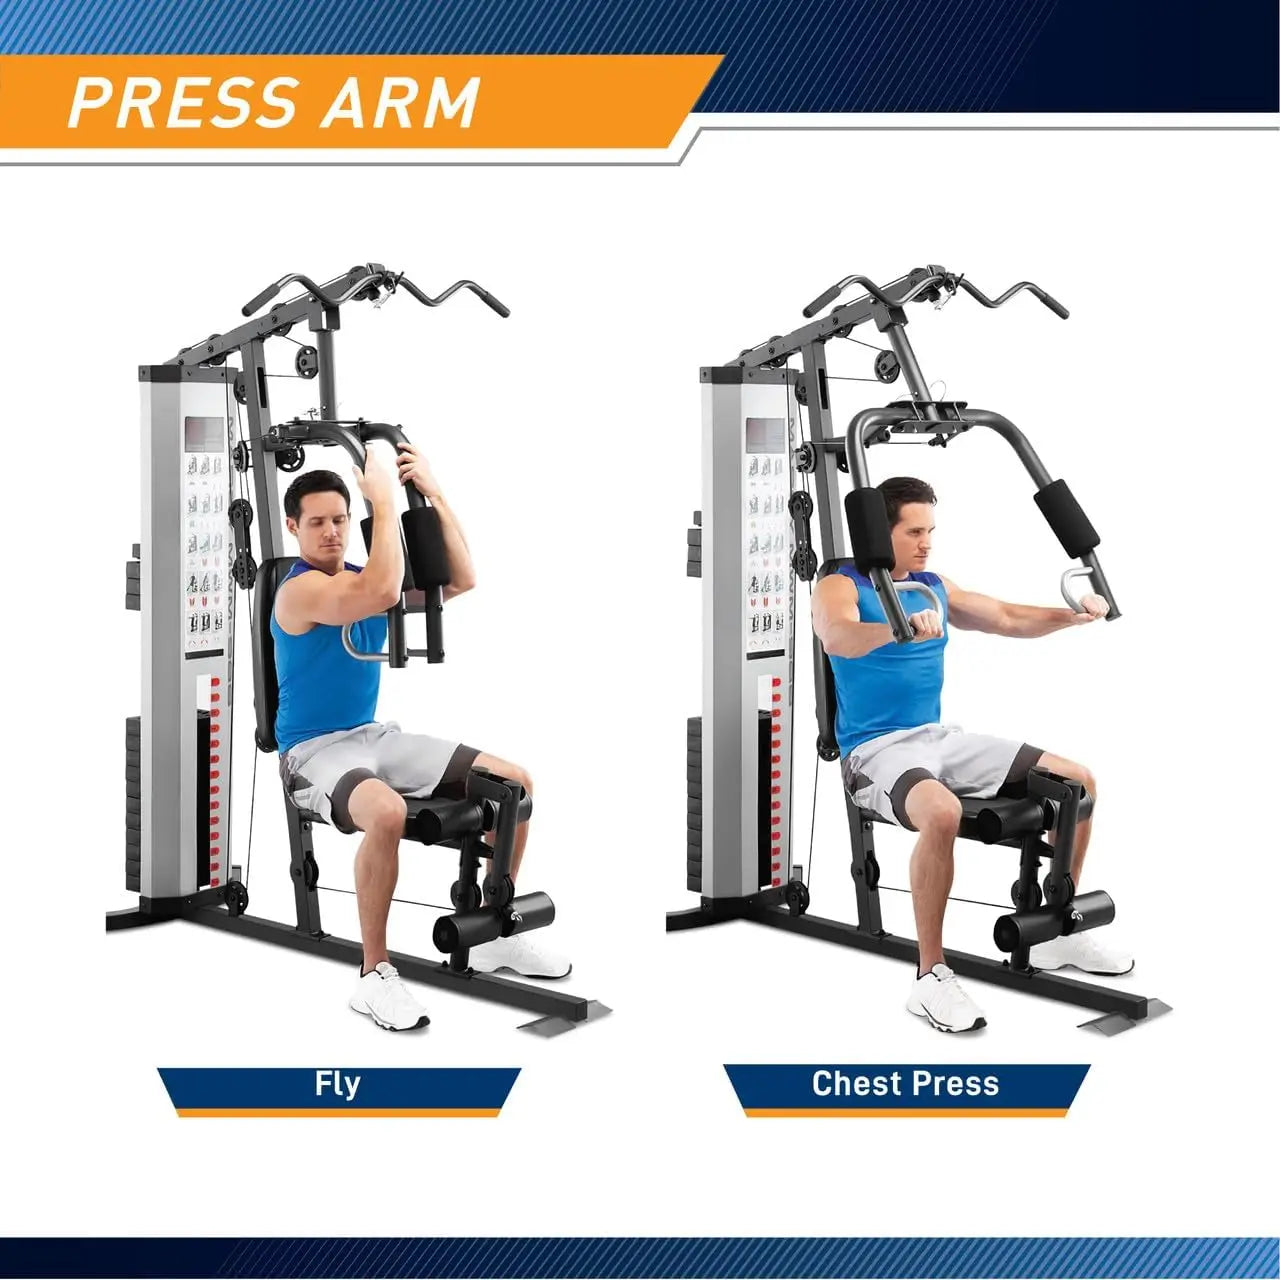 Marcy Multifunction Steel Home Gym/150lb Weight Stack Machine fitness equipment